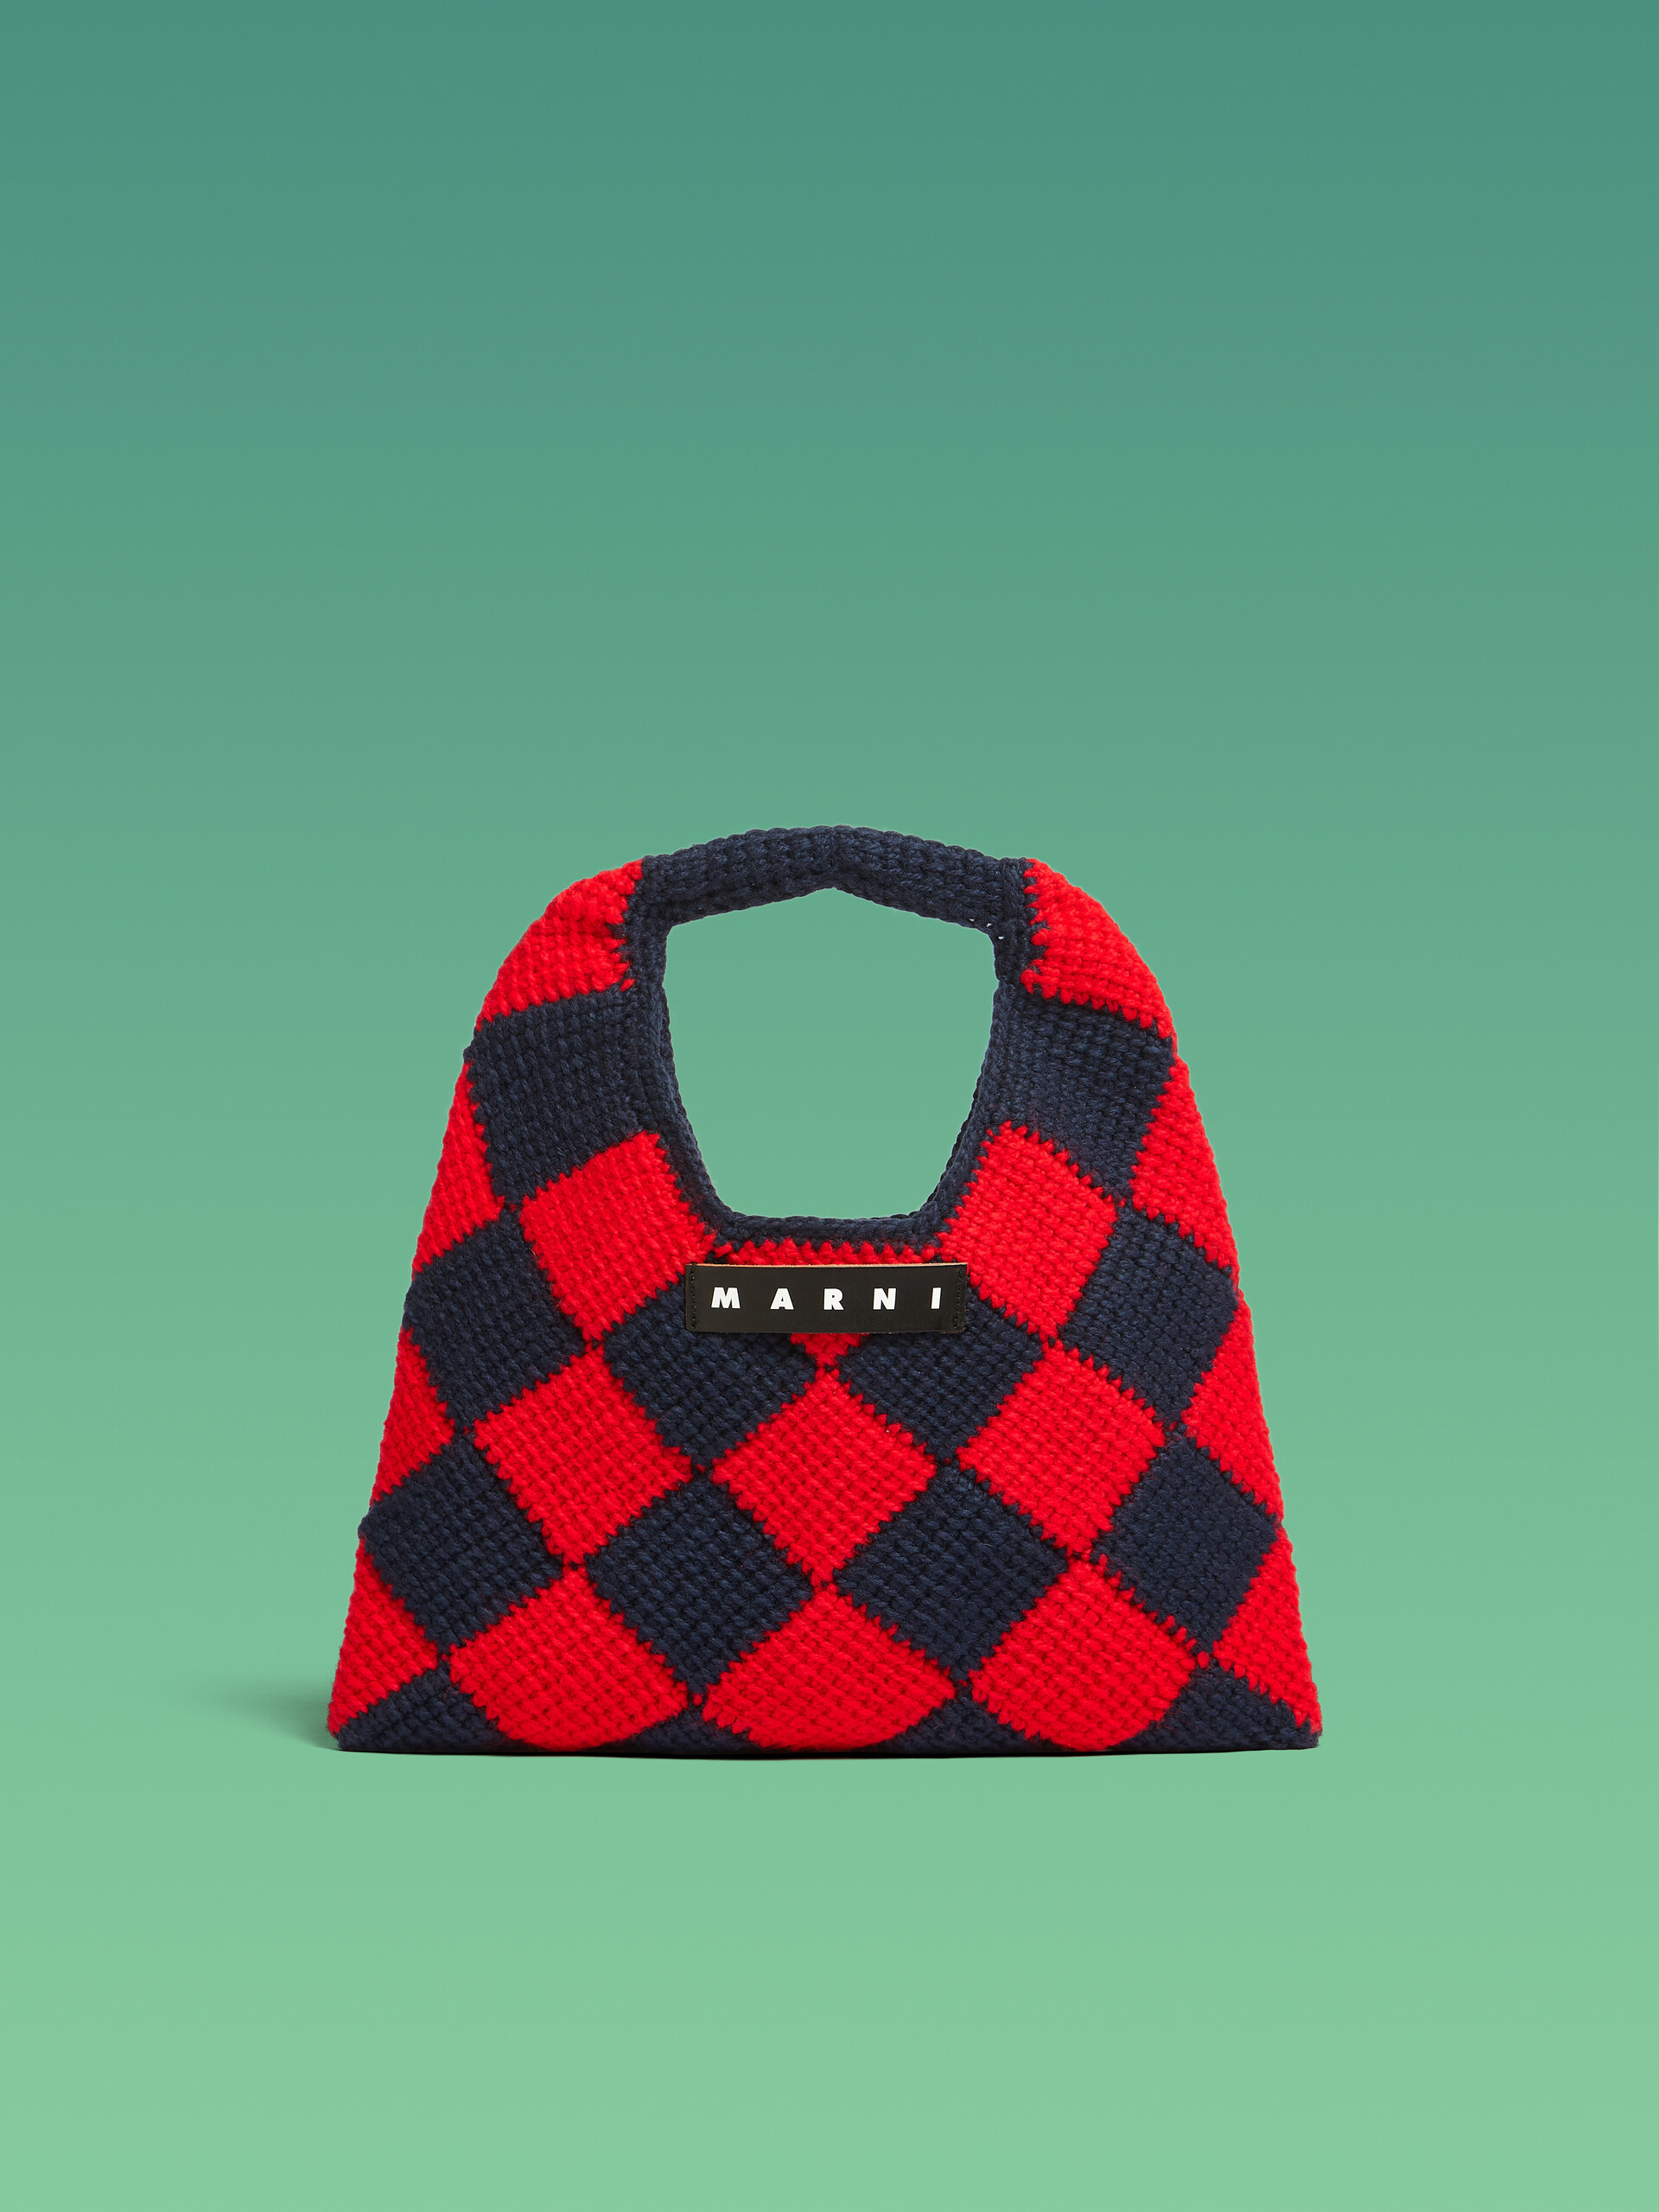 MARNI MARKET DIAMOND medium bag in blue and red tech wool - Bags - Image 1